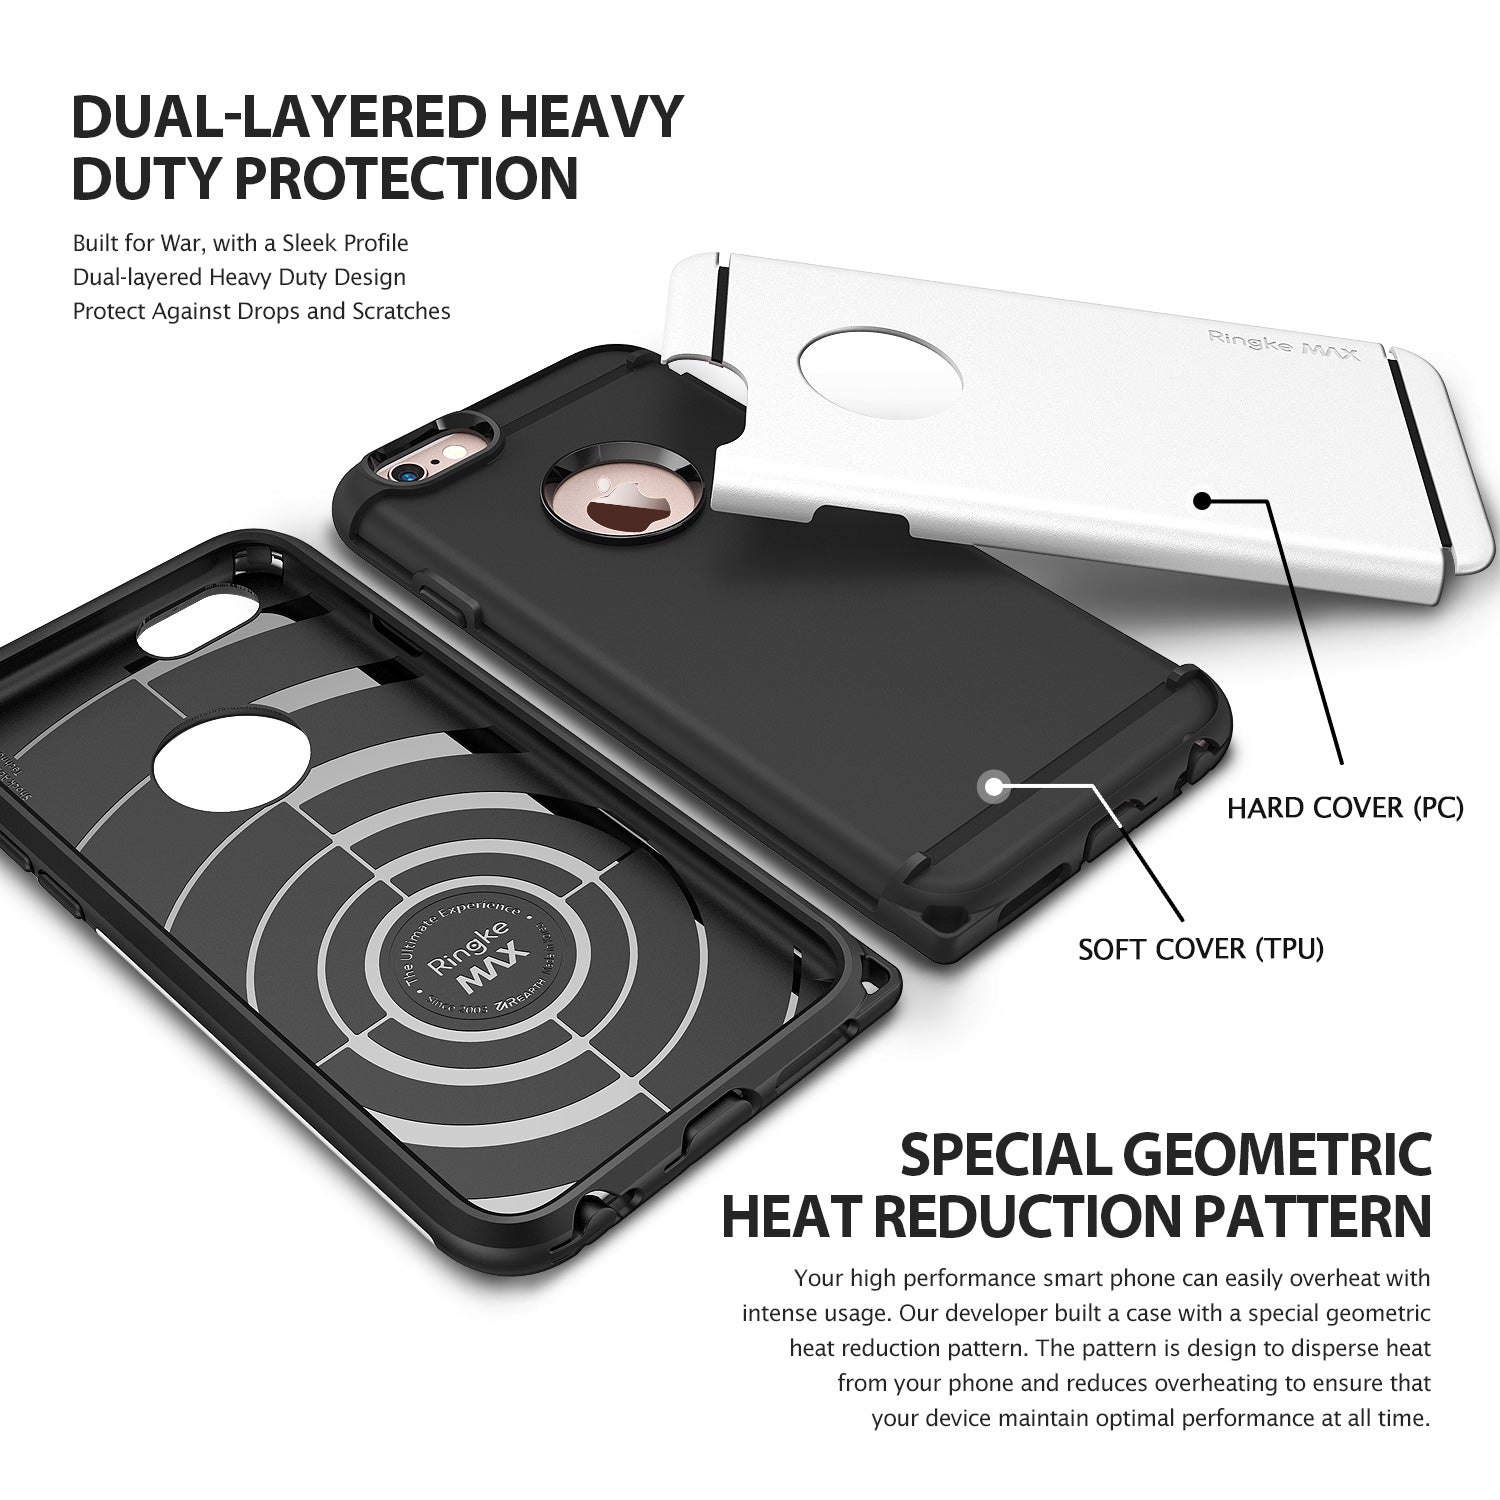 Galaxy S6 Plus Case | Max - Dual-Layered Heavy Duty Protection